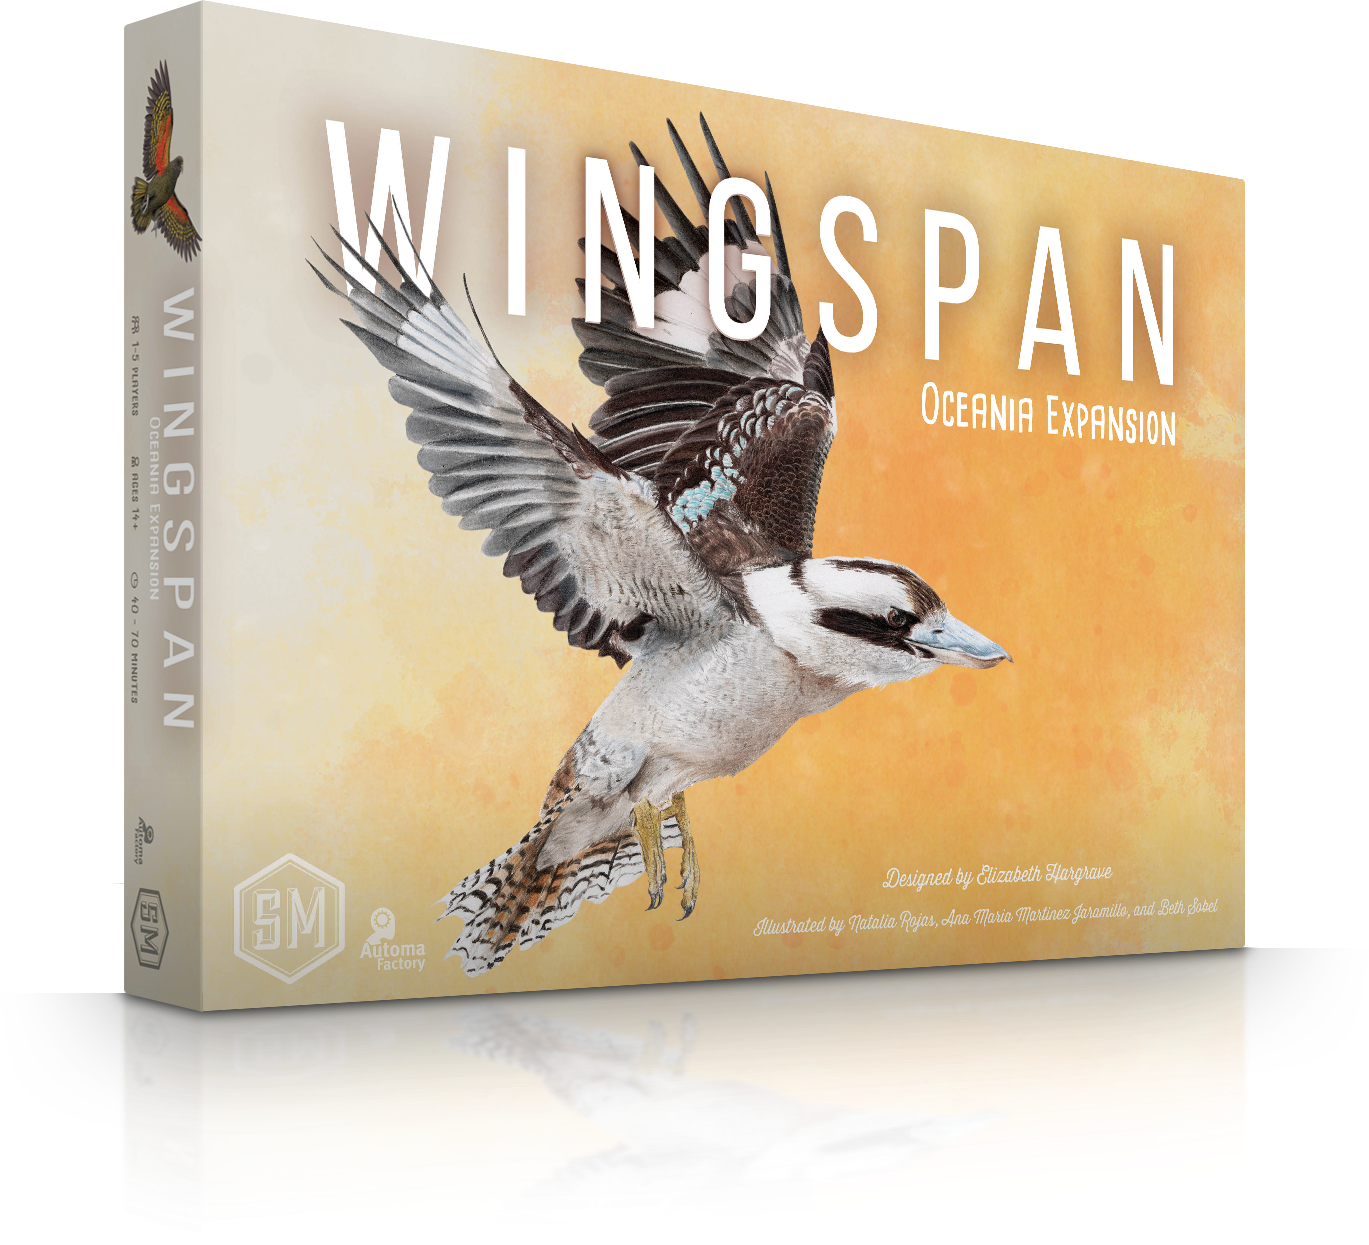 Wingspan Oceania Expansion – Stonemaier Games